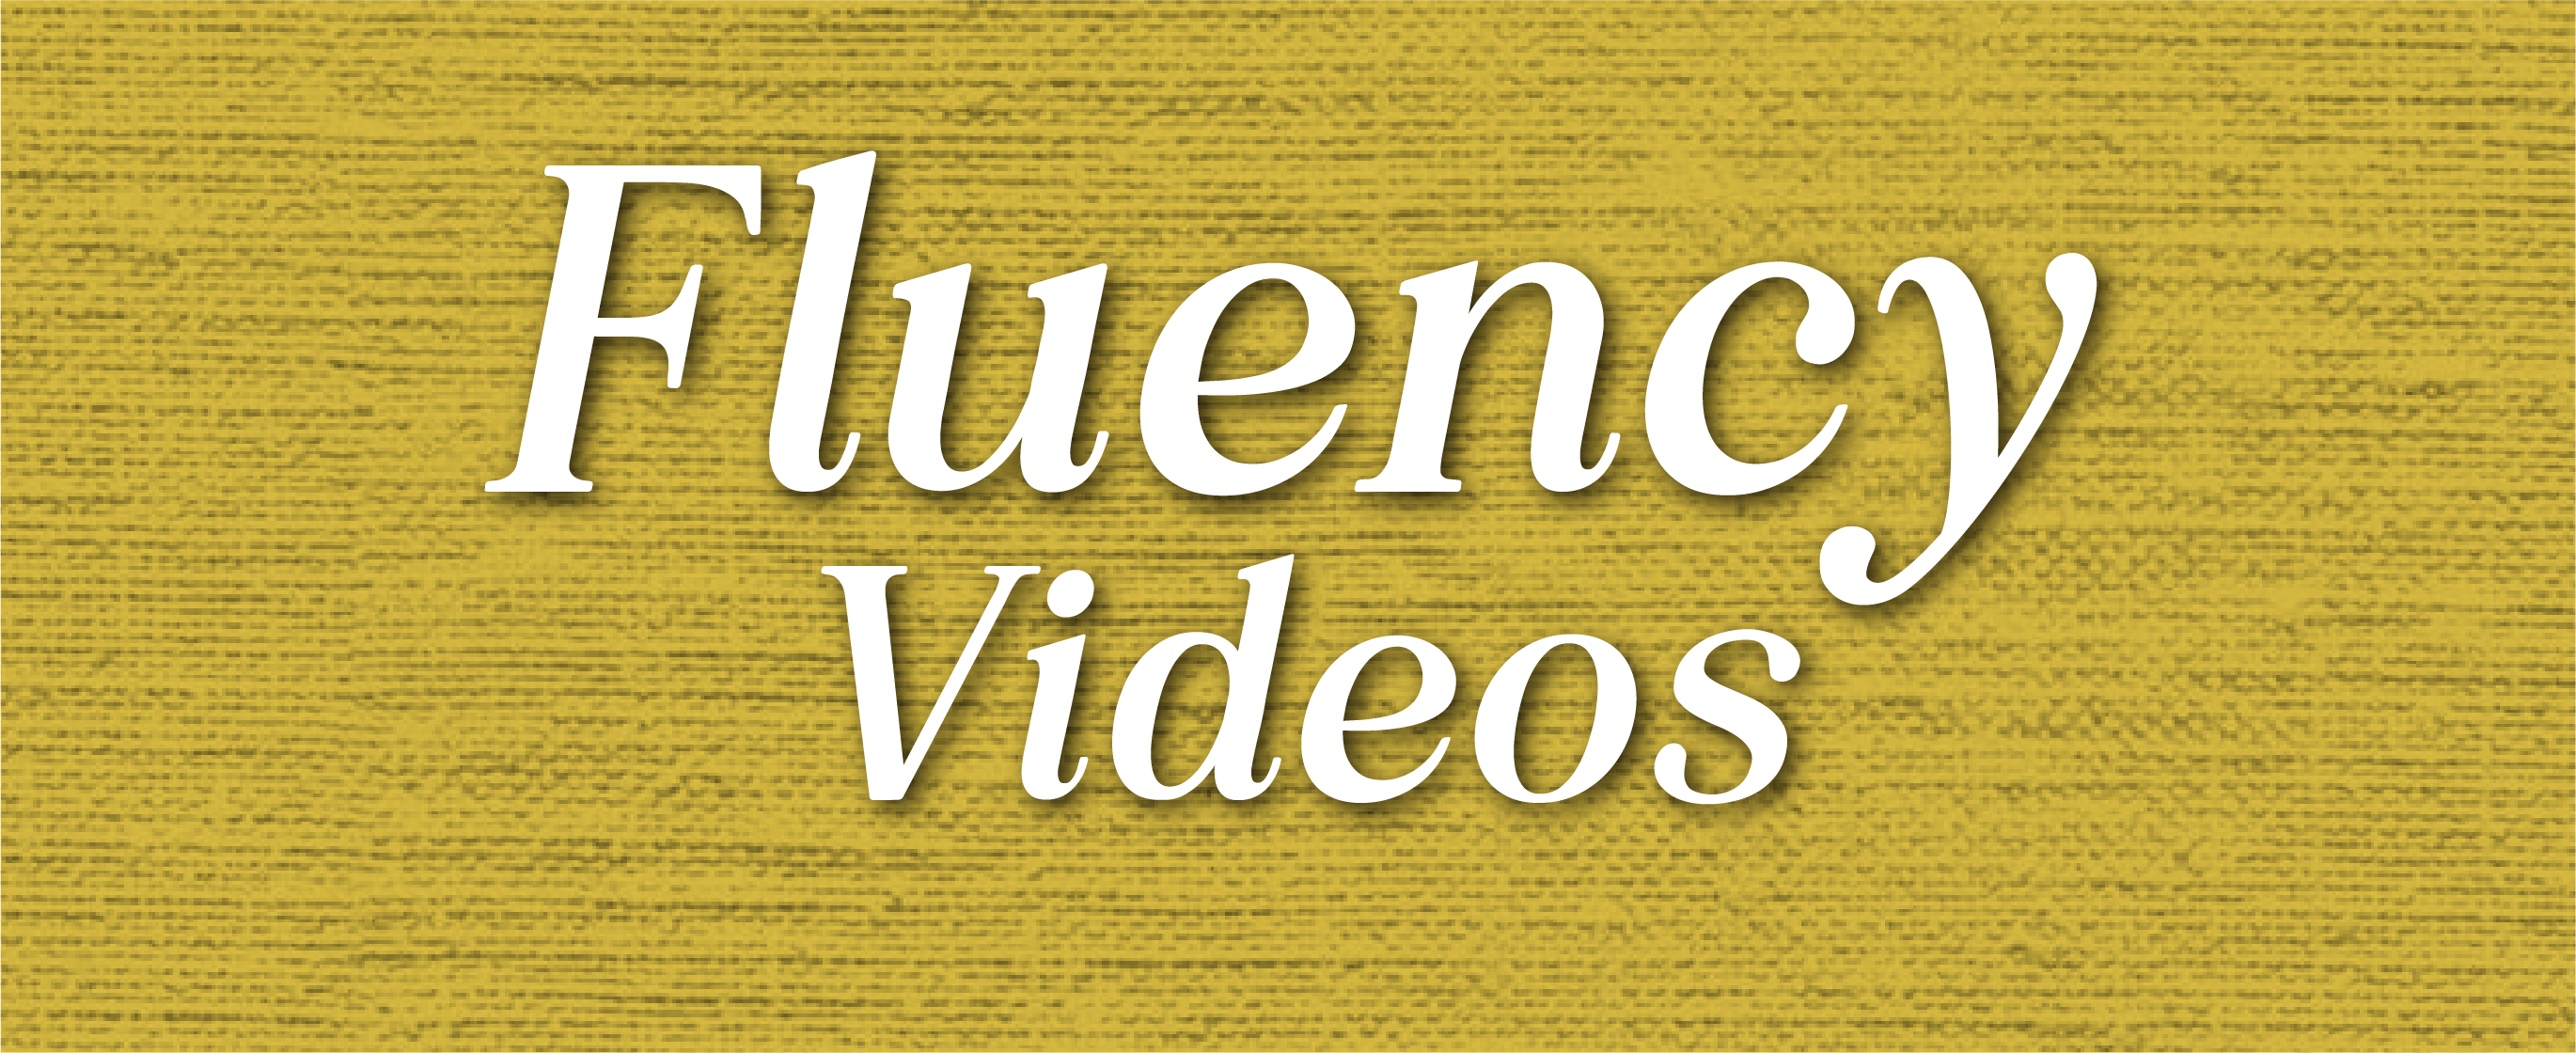 Fluency (stuttering) Videos for Speech Therapy